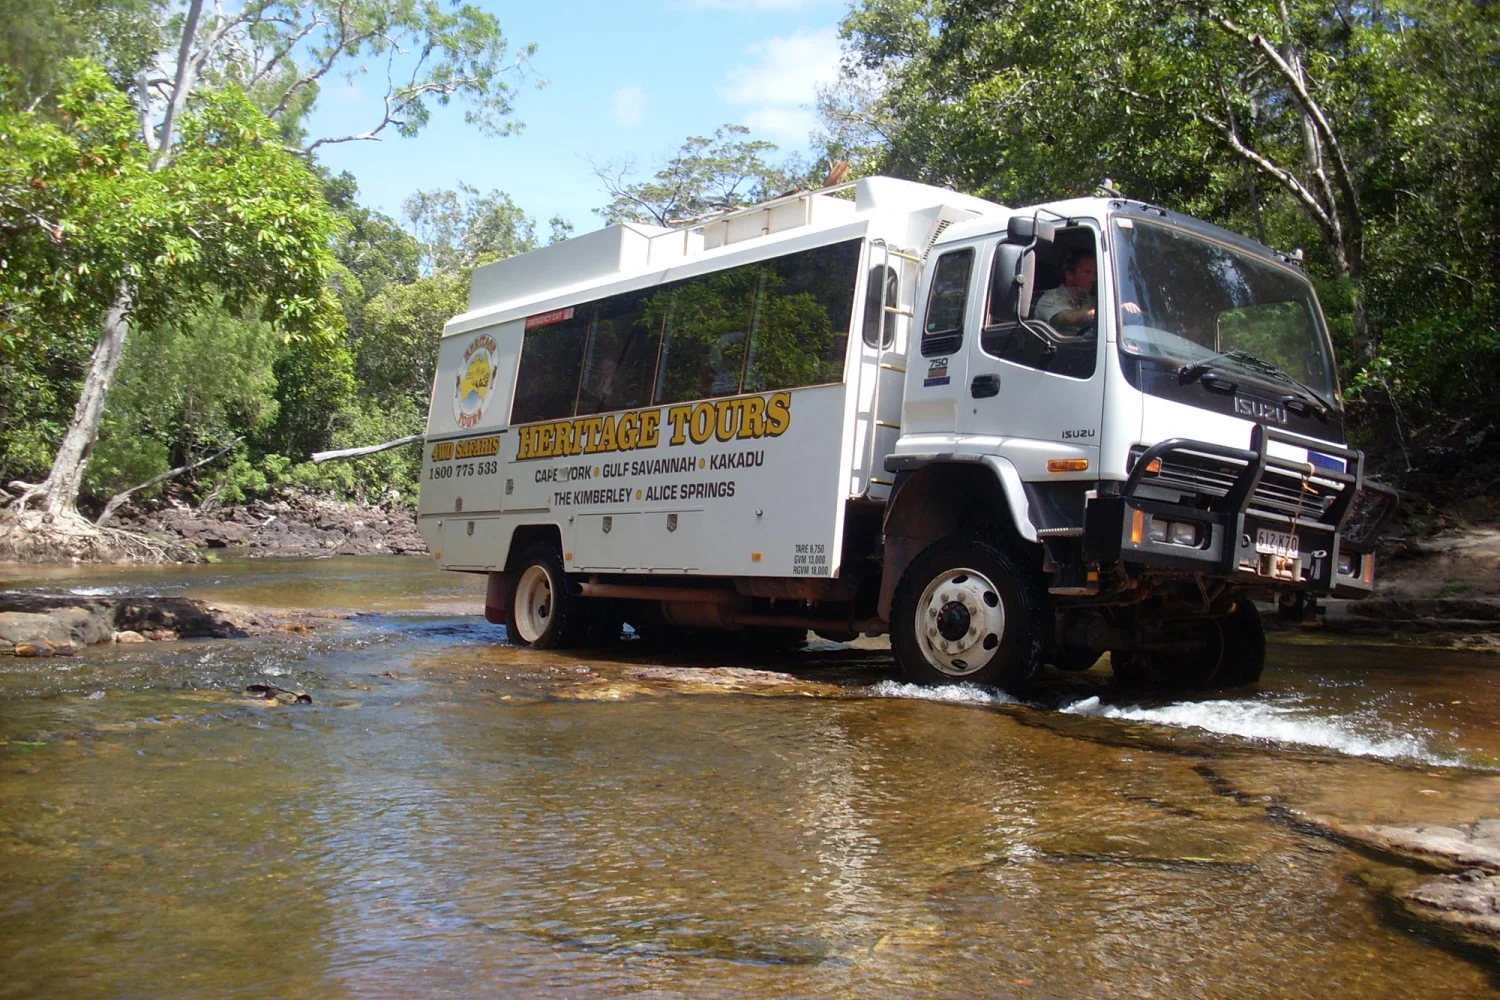 Cape York - Heritage Tours - Bus - River crossing